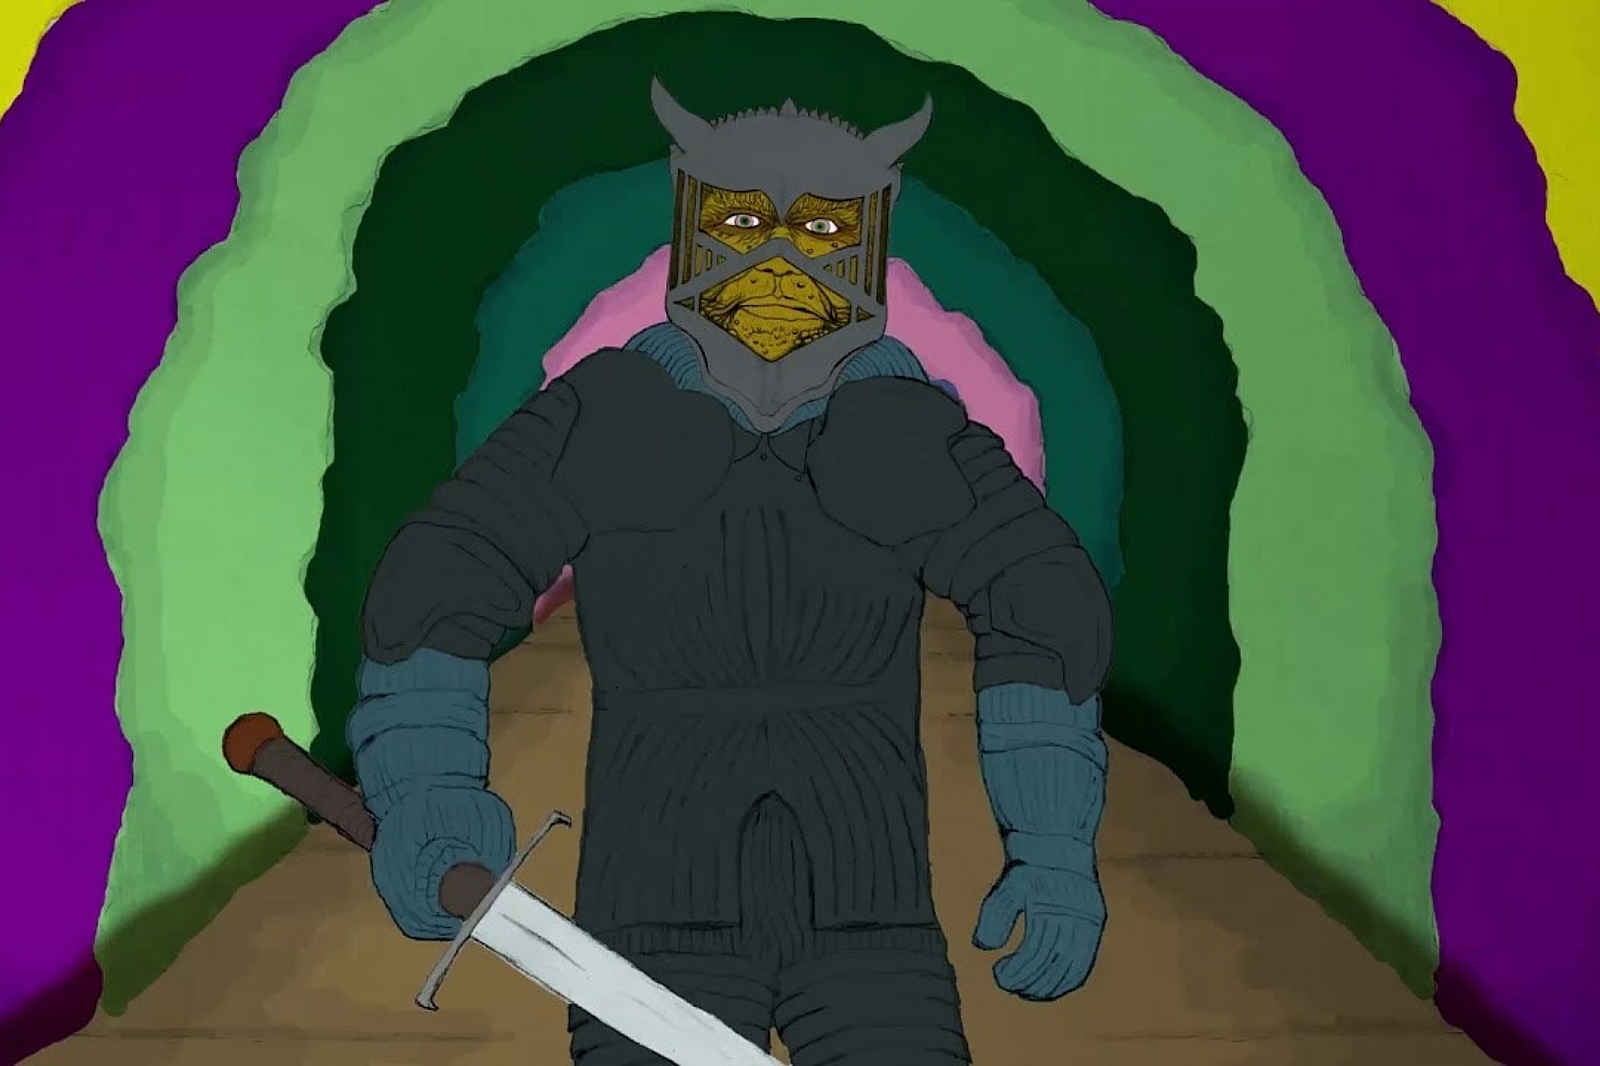 Oh Sees get animated in the new video for ‘Nite Expo’